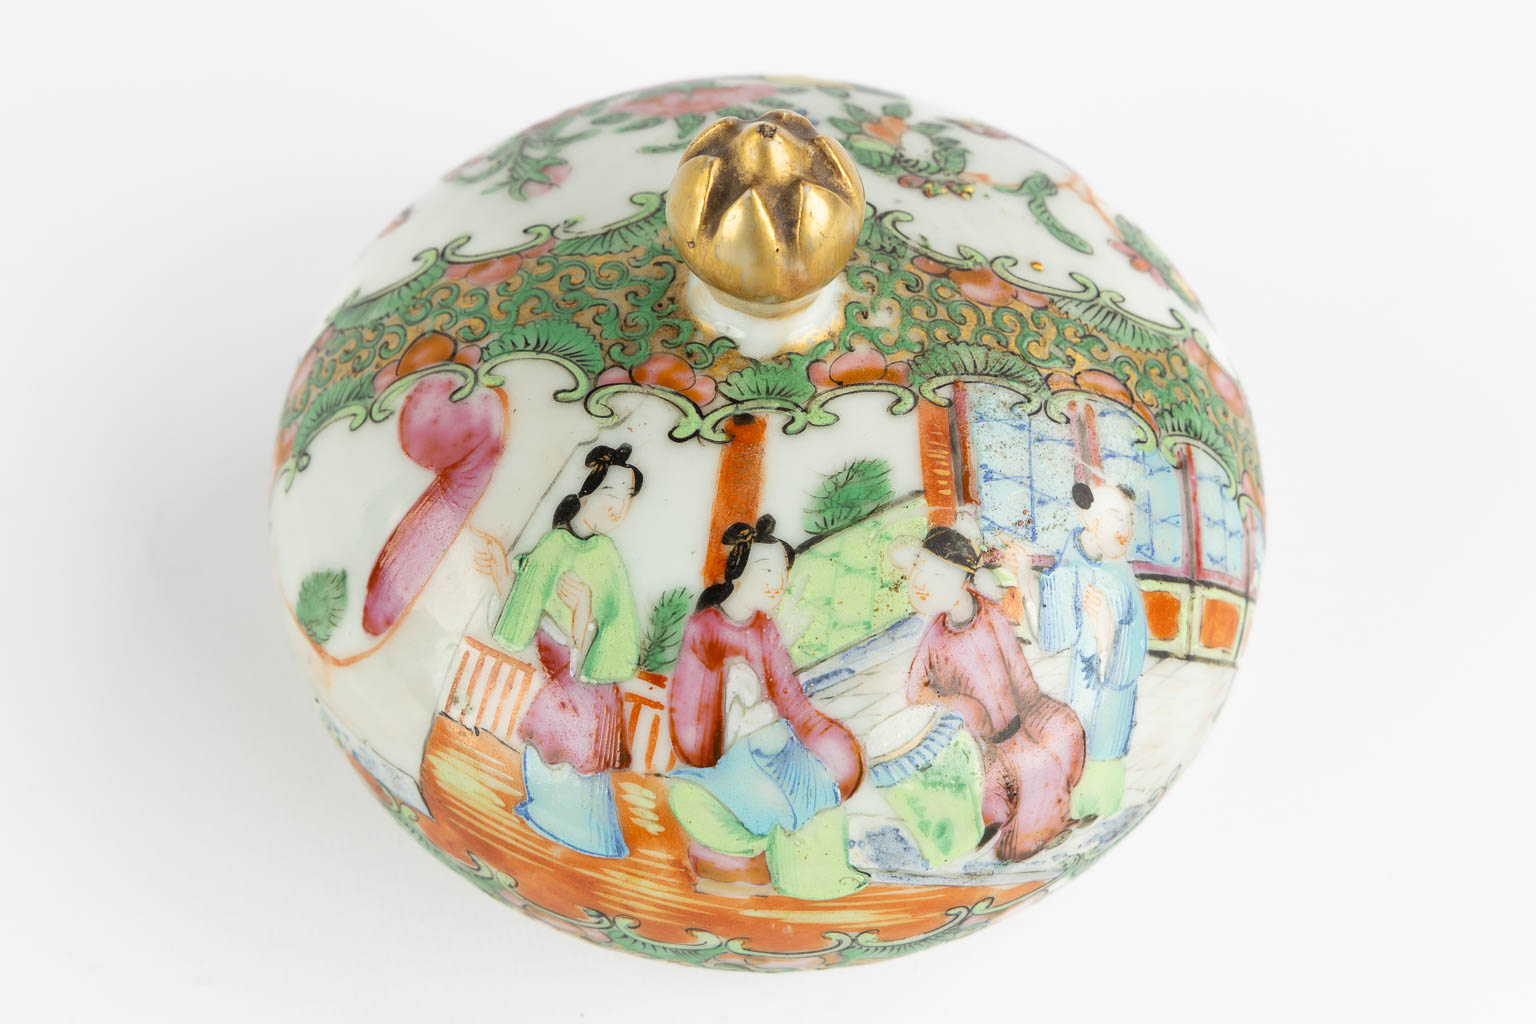 A Chinese Canton vase with a lid, interior scnes with figurines, fauna and flora. 19th/20th C. (H:4 - Image 12 of 19